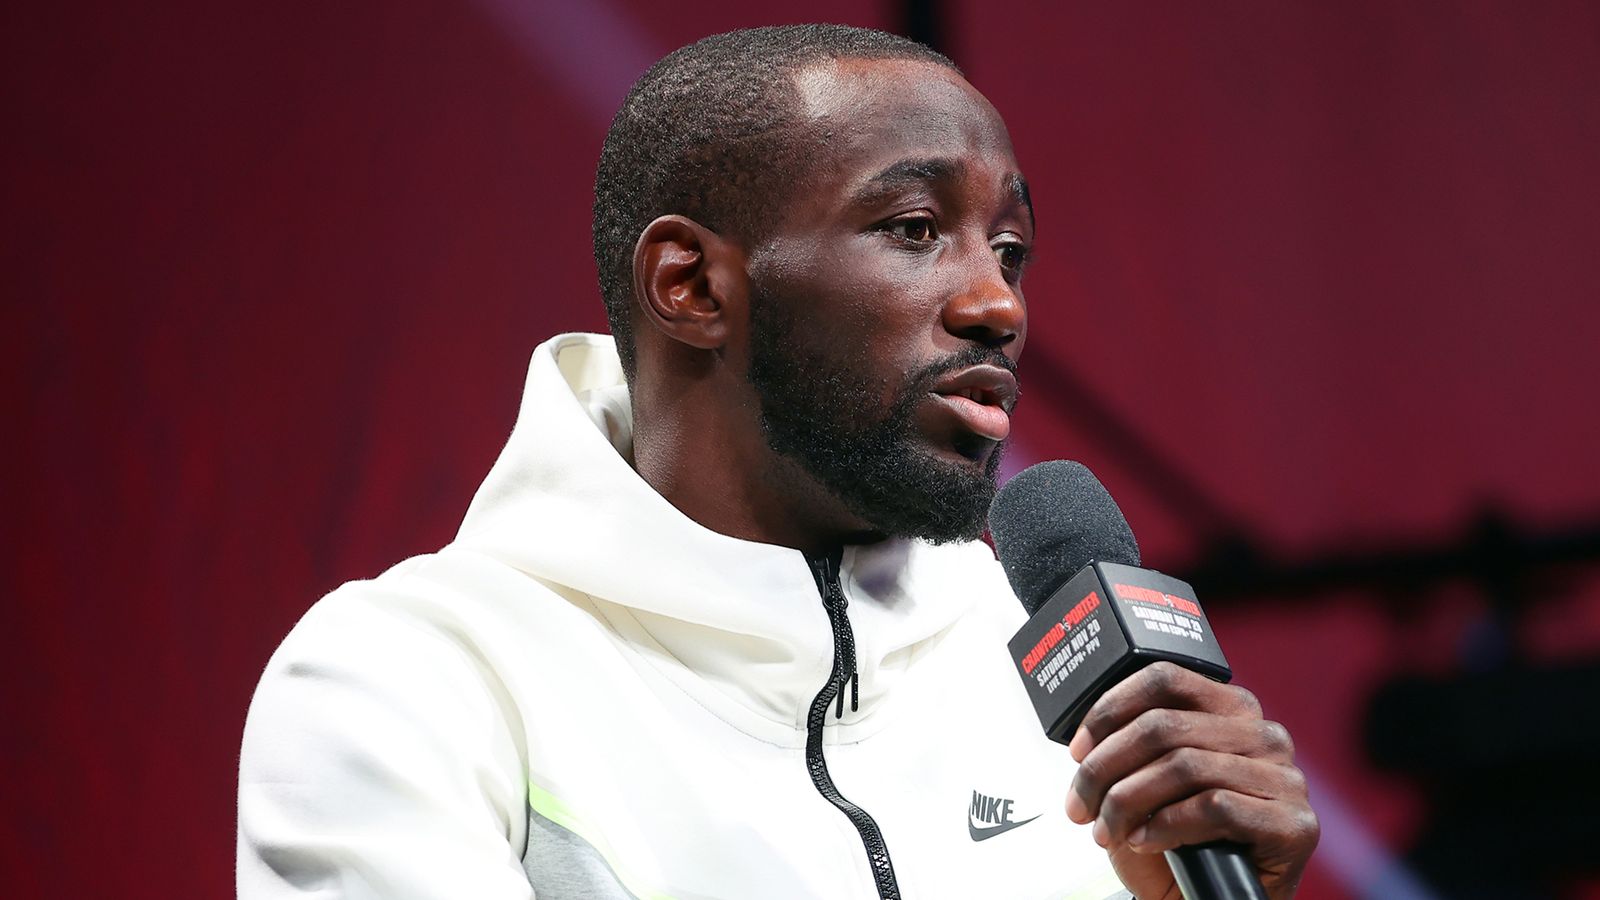 Terence Crawford and Shawn Porter did not face-off at press conference amid a tense atmosphere before world title collision | Boxing News